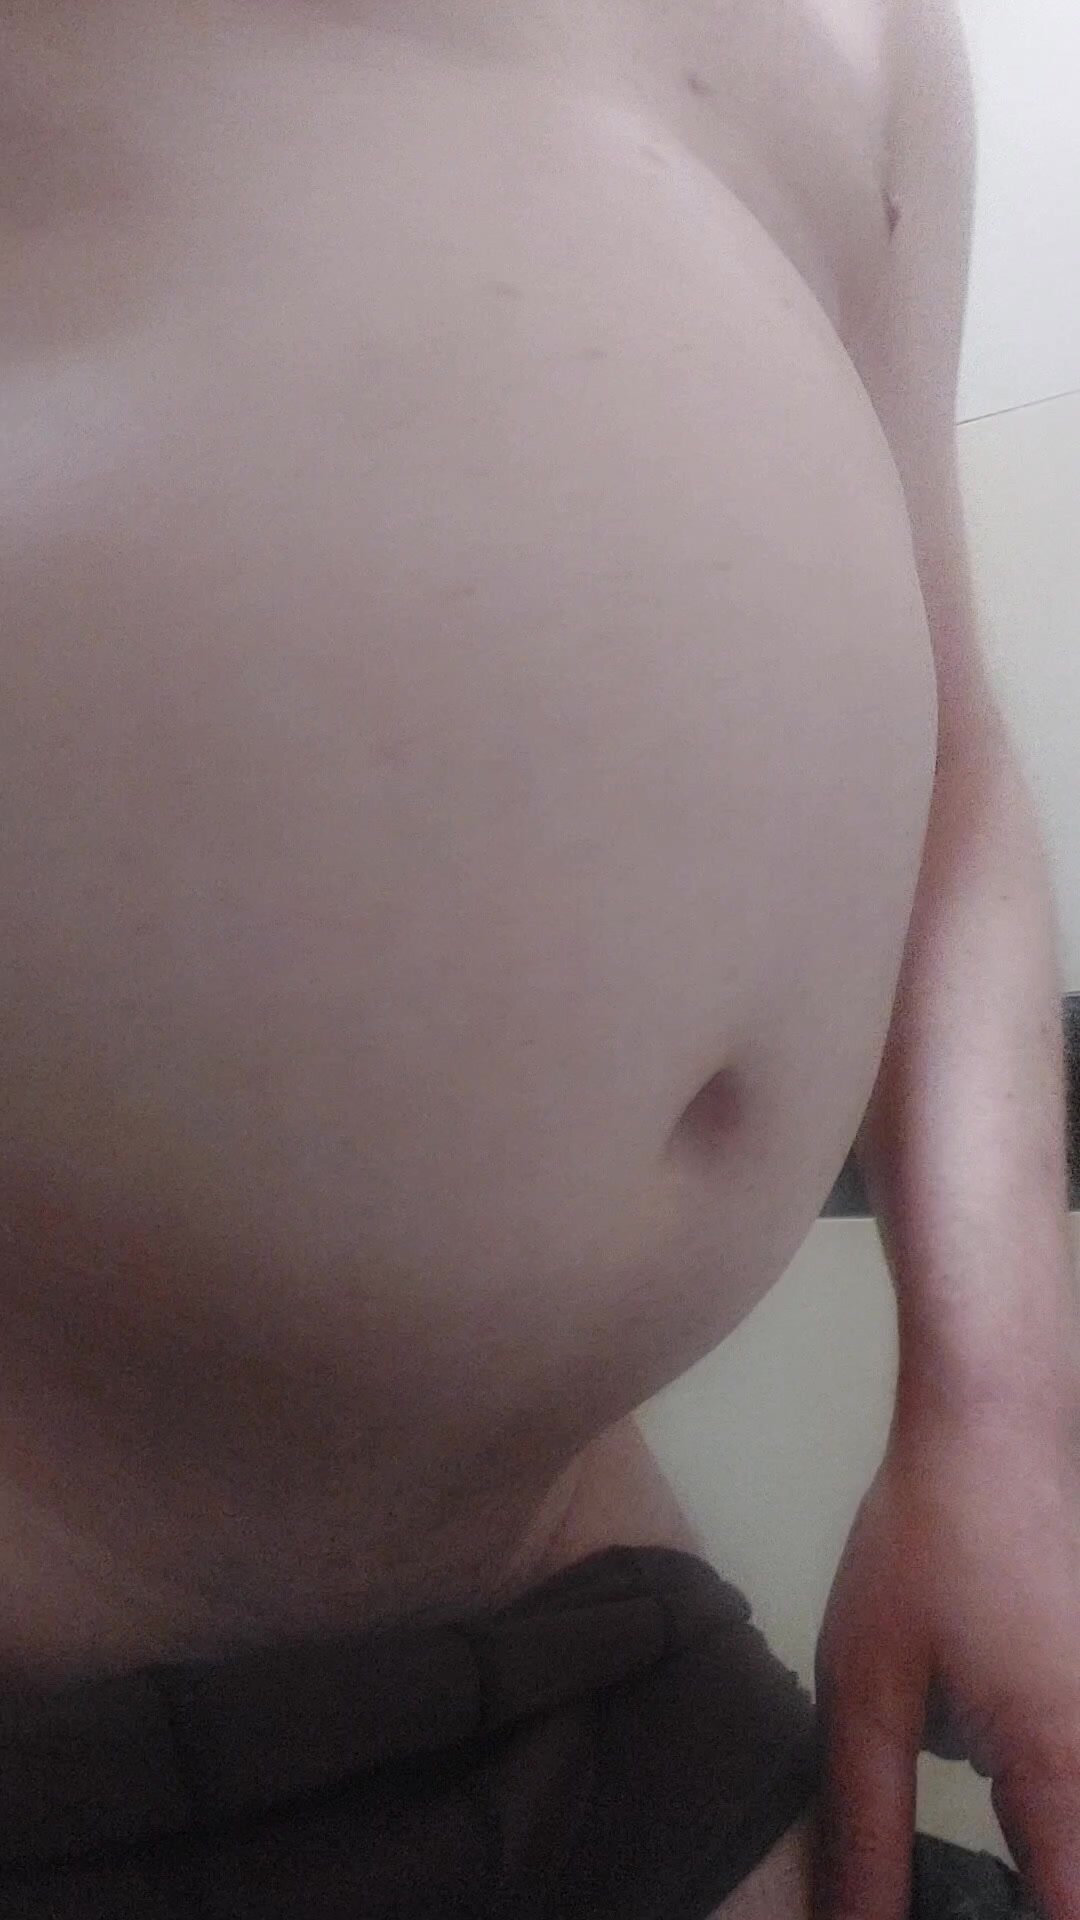 Very constipated and bloated gay bottom straining assho